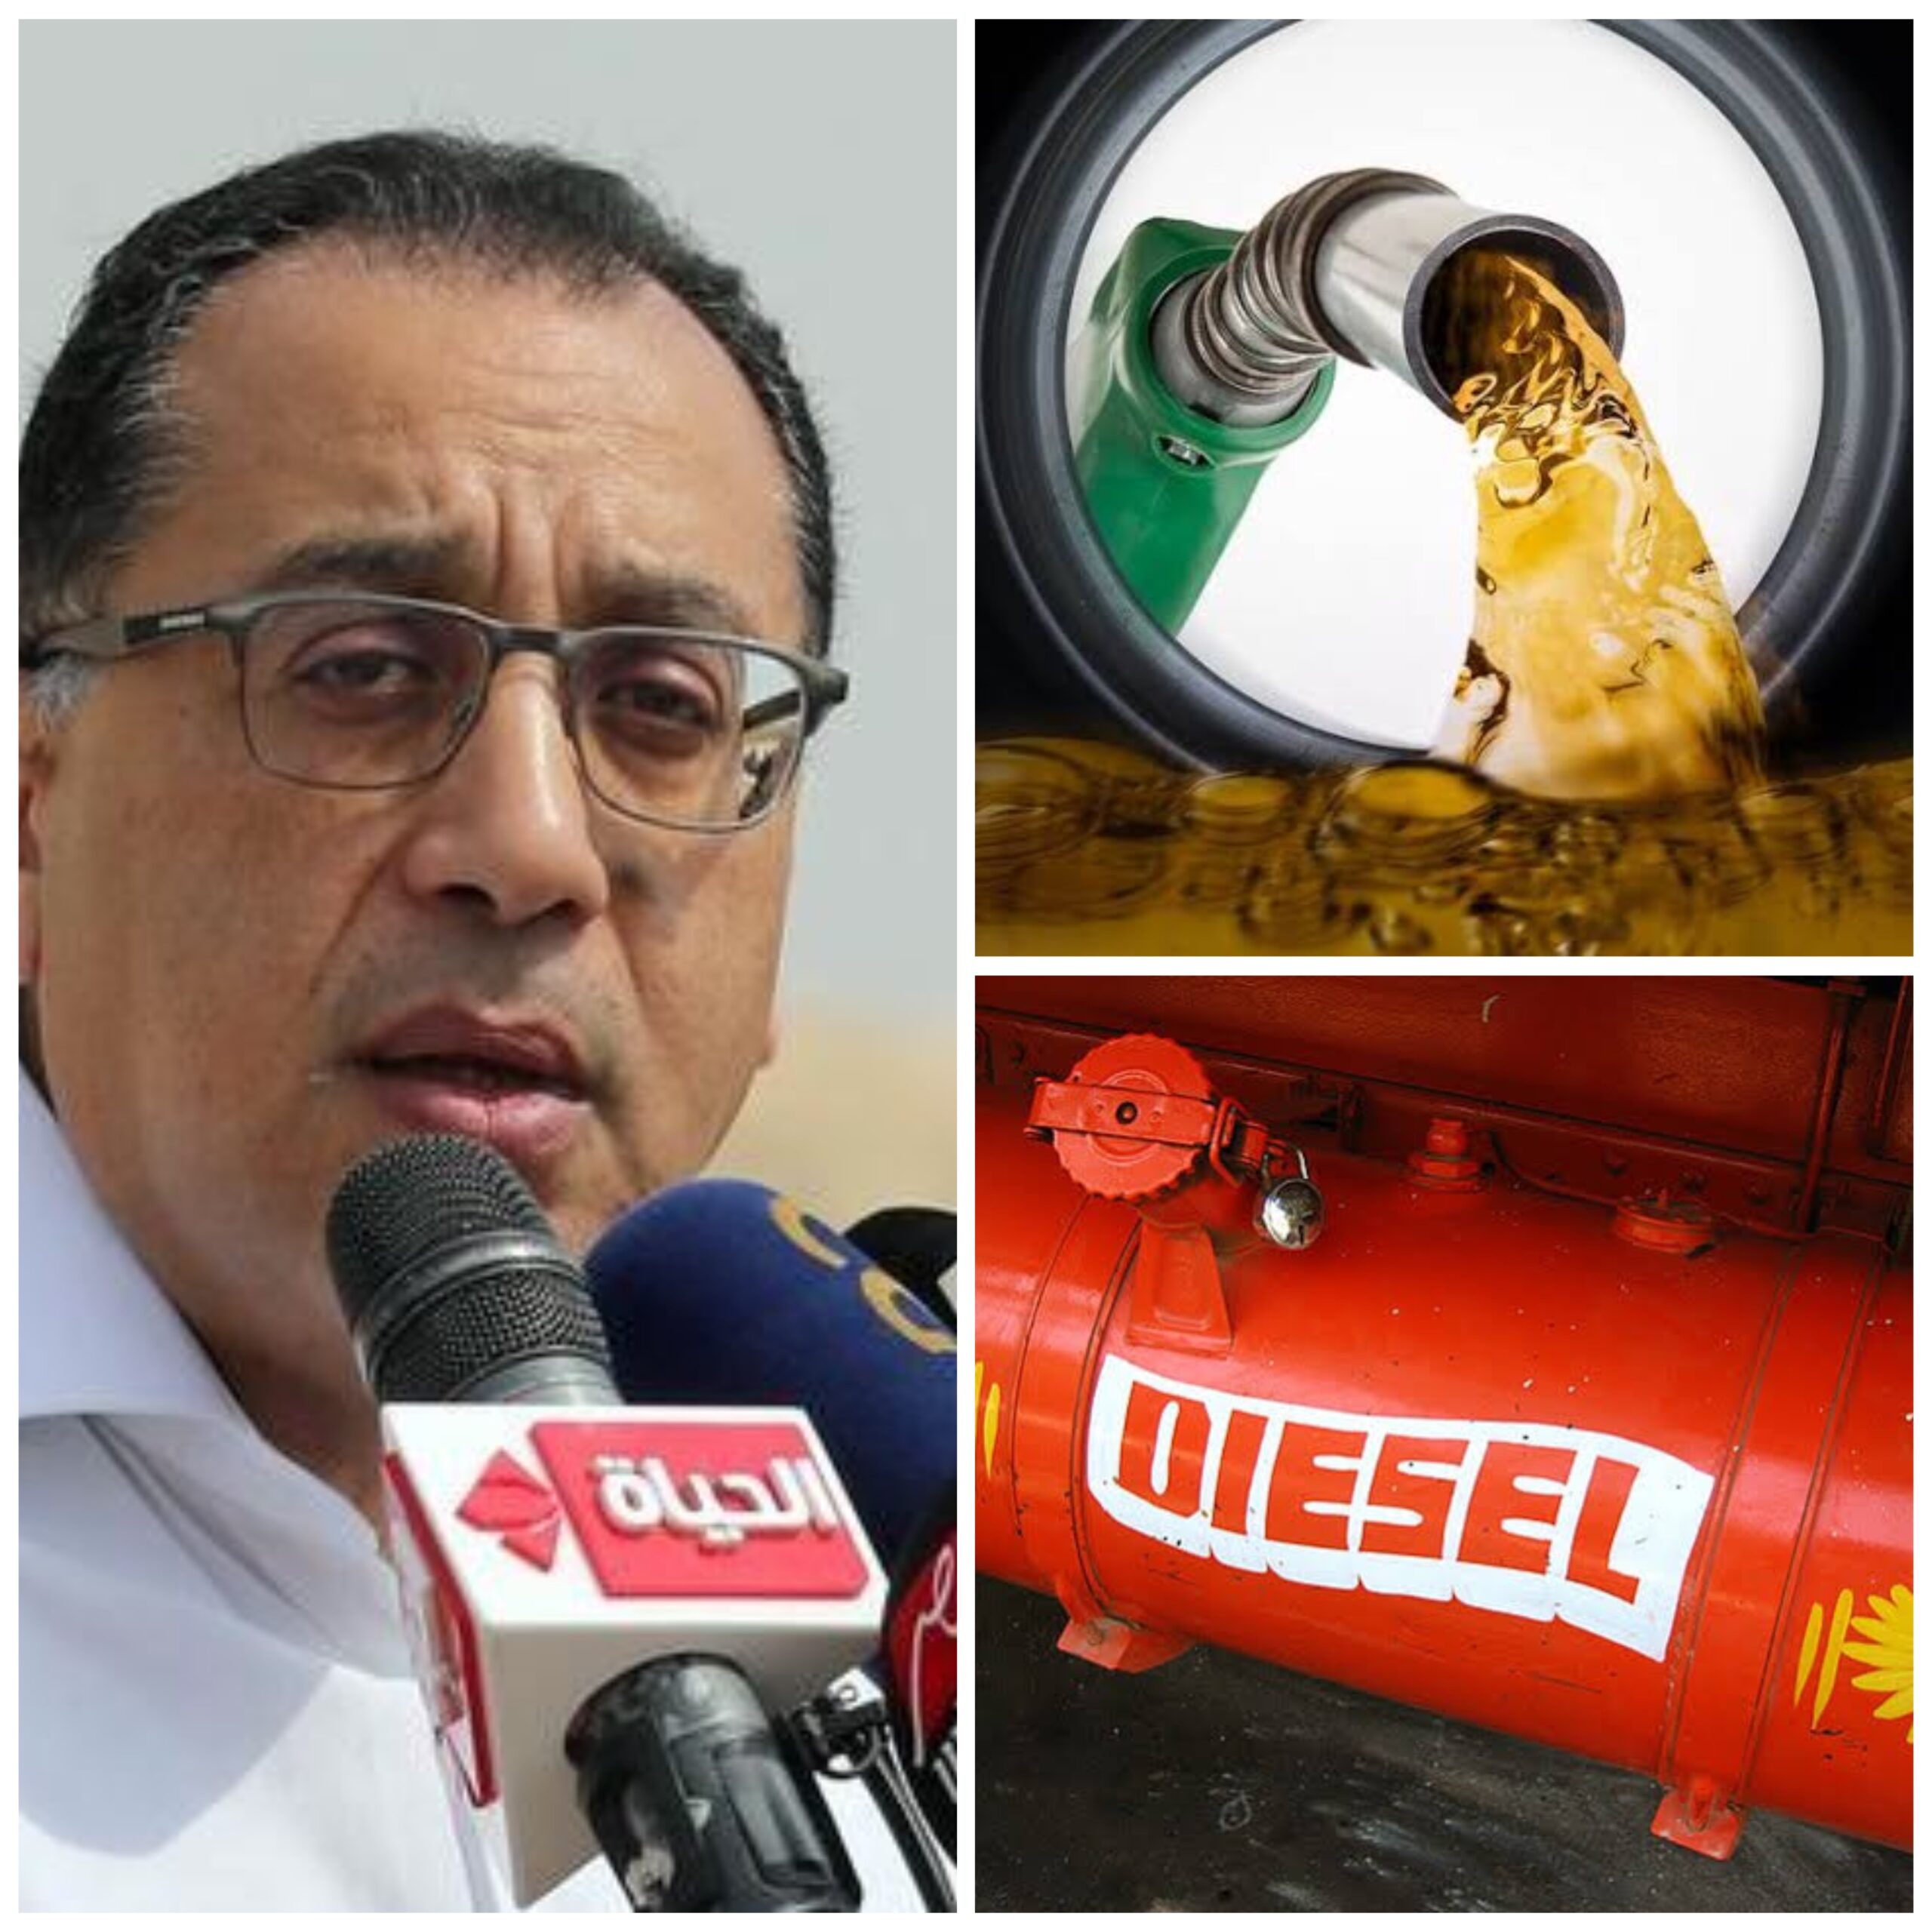 Egypt Subsidizes Diesel For Citizens at $3 Billion Annually, PM Says